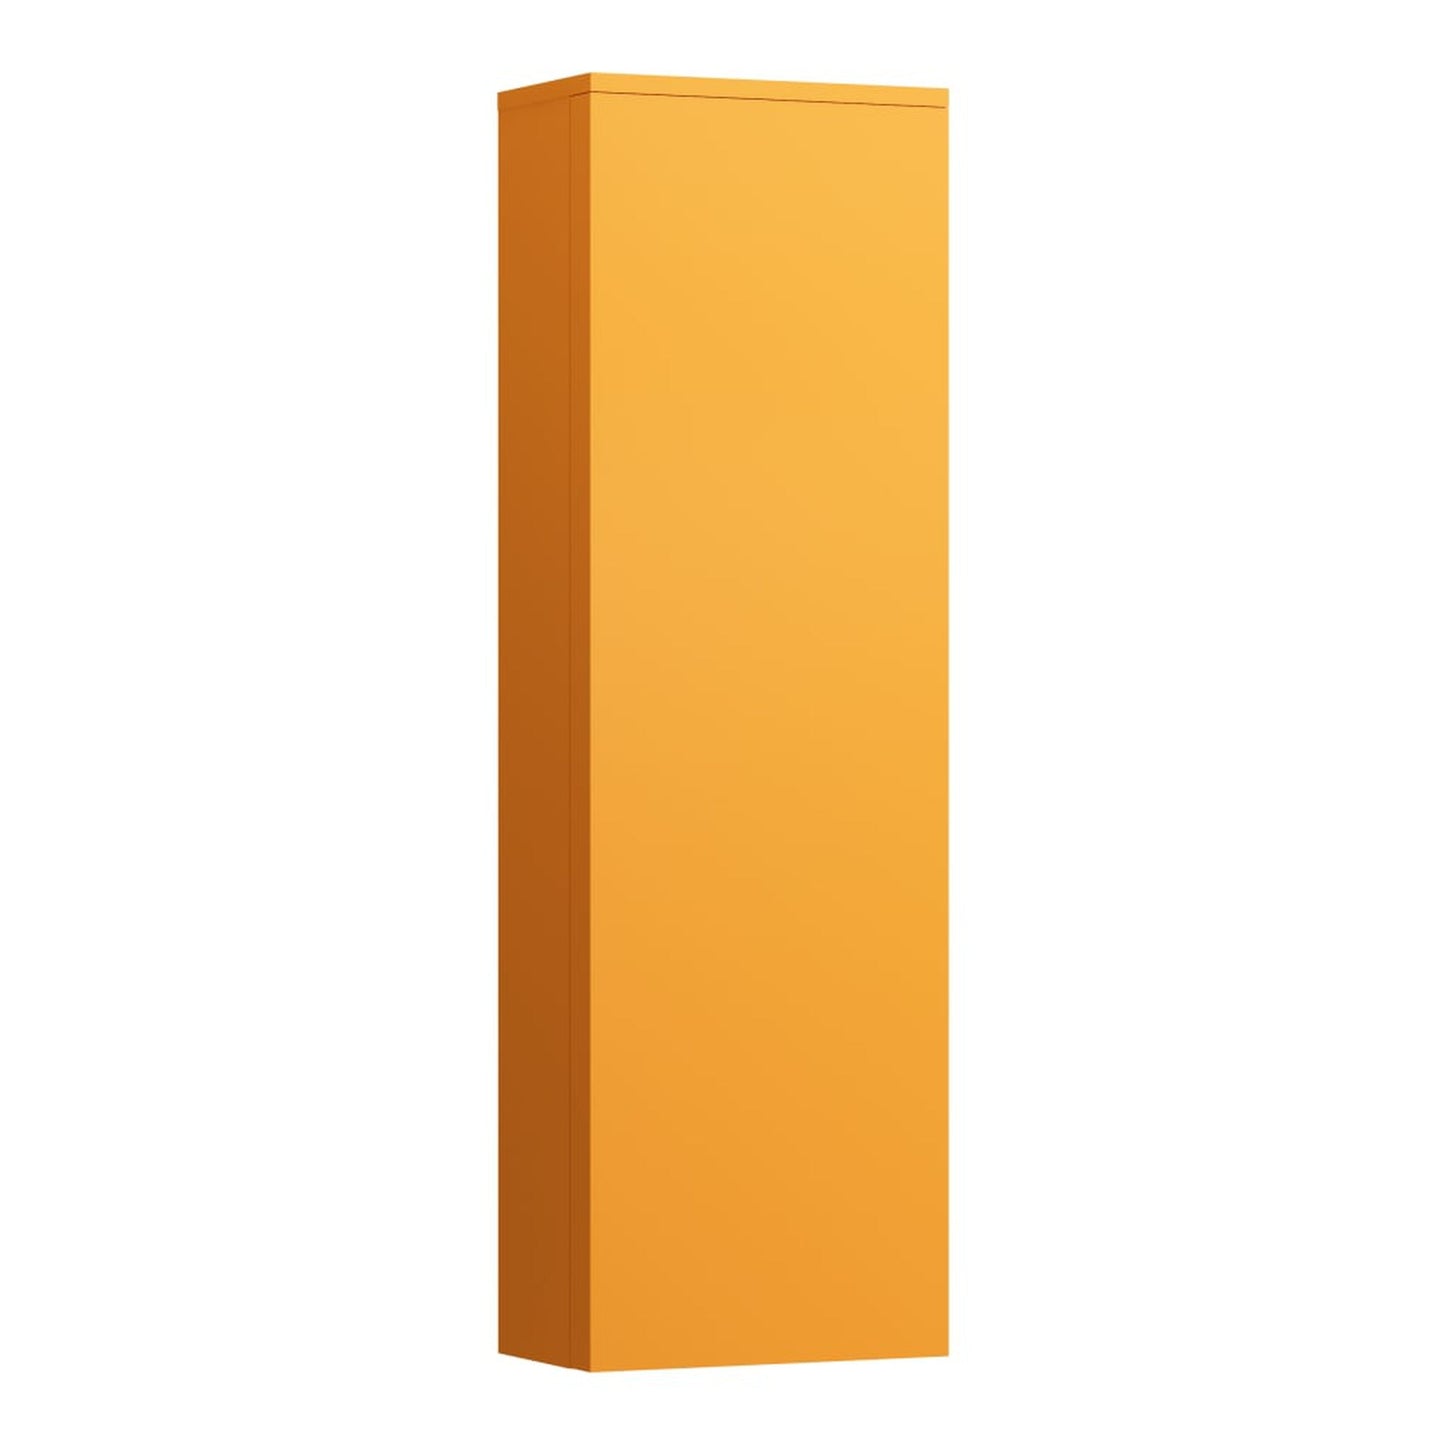 Laufen Kartell 16" x 51" 1-Door Left-Hinged Ochre Brown Wall-Mounted Tall Cabinet With 4 Fixed Glass Shelves